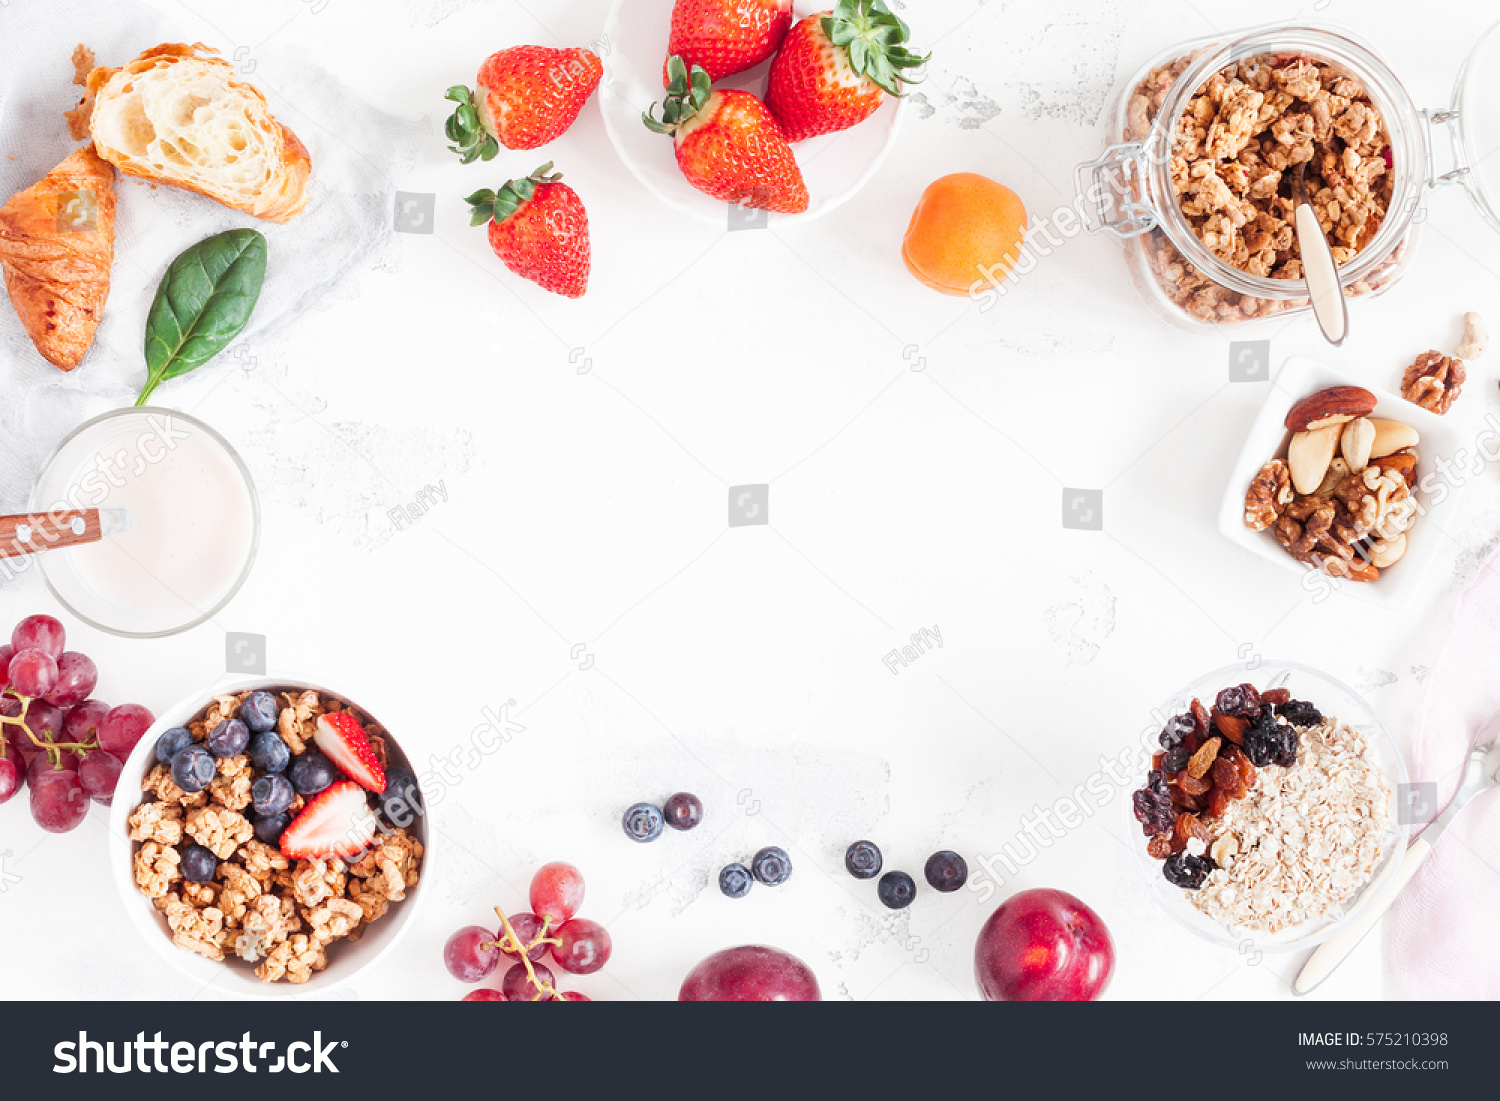 Healthy breakfast with muesli, fruits, berries, nuts on white background. Flat lay, top view, copy space. #575210398